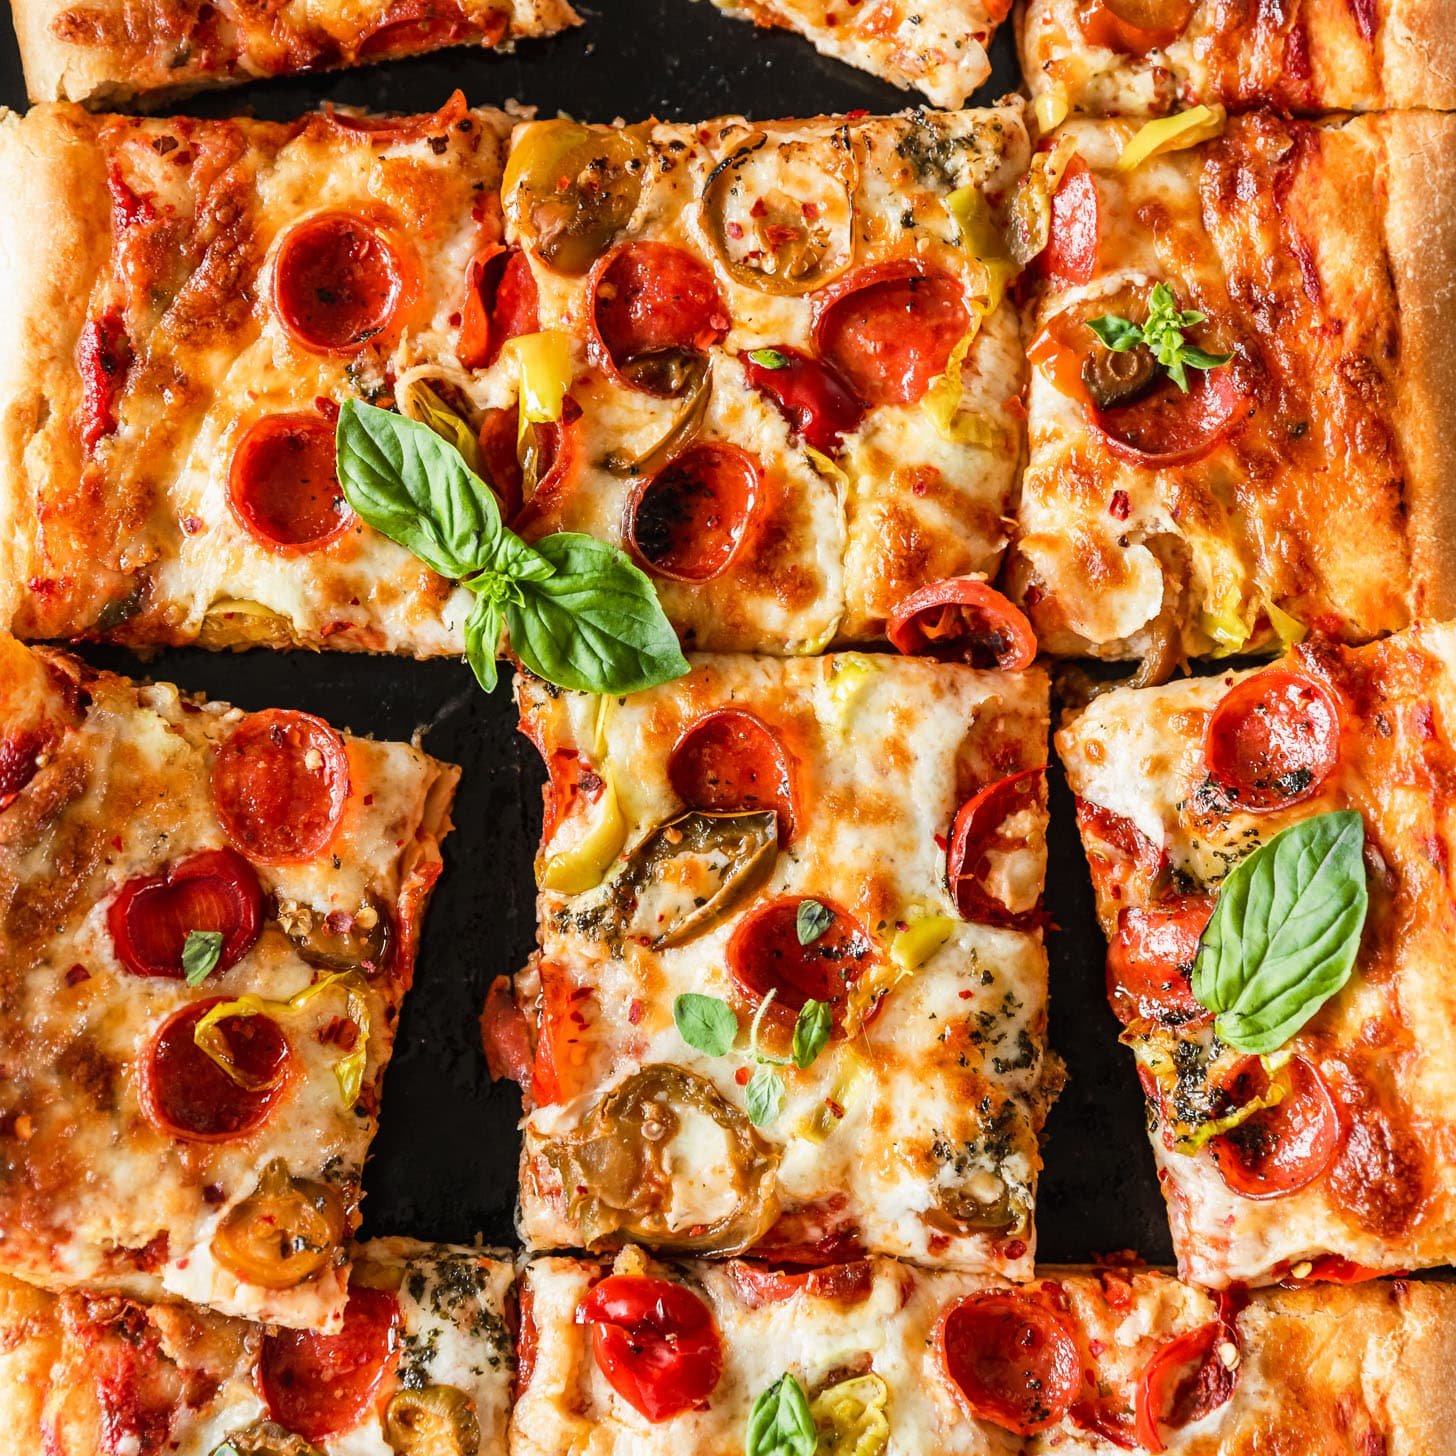 https://sundaytable.co/wp-content/uploads/2019/09/what-is-sicilian-pizza.jpg